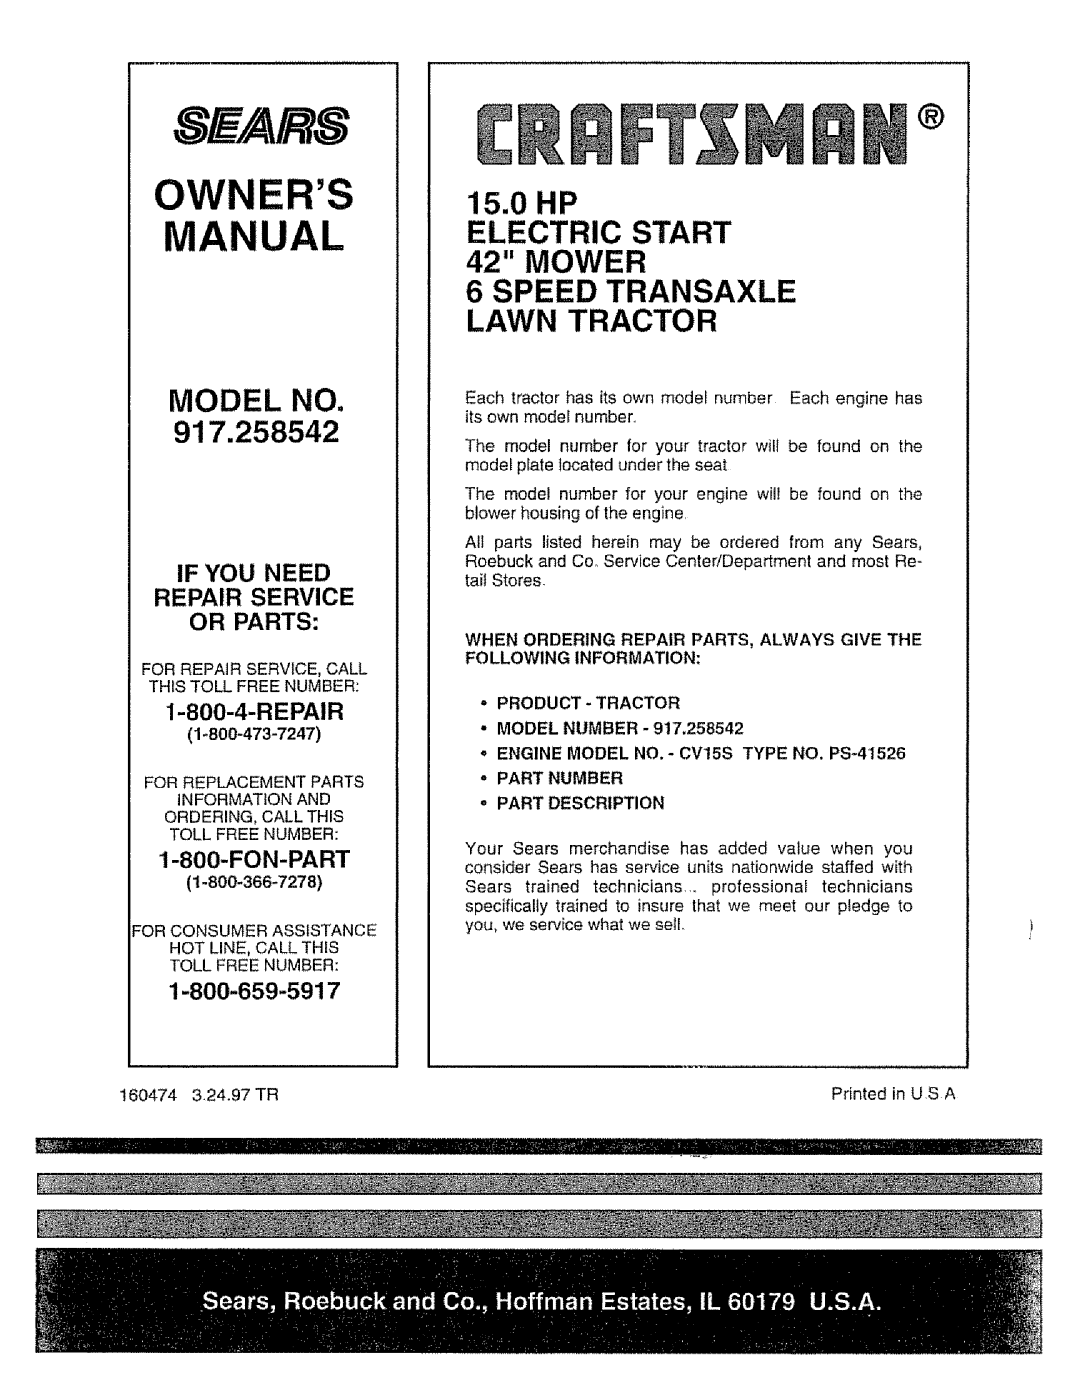 Sears Owners, Manual, MODEL NO 917.258542, 15.0HP ELECTRIC START 42 MOWER 6 SPEED TRANSAXLE, Lawn Tractor, Repair 